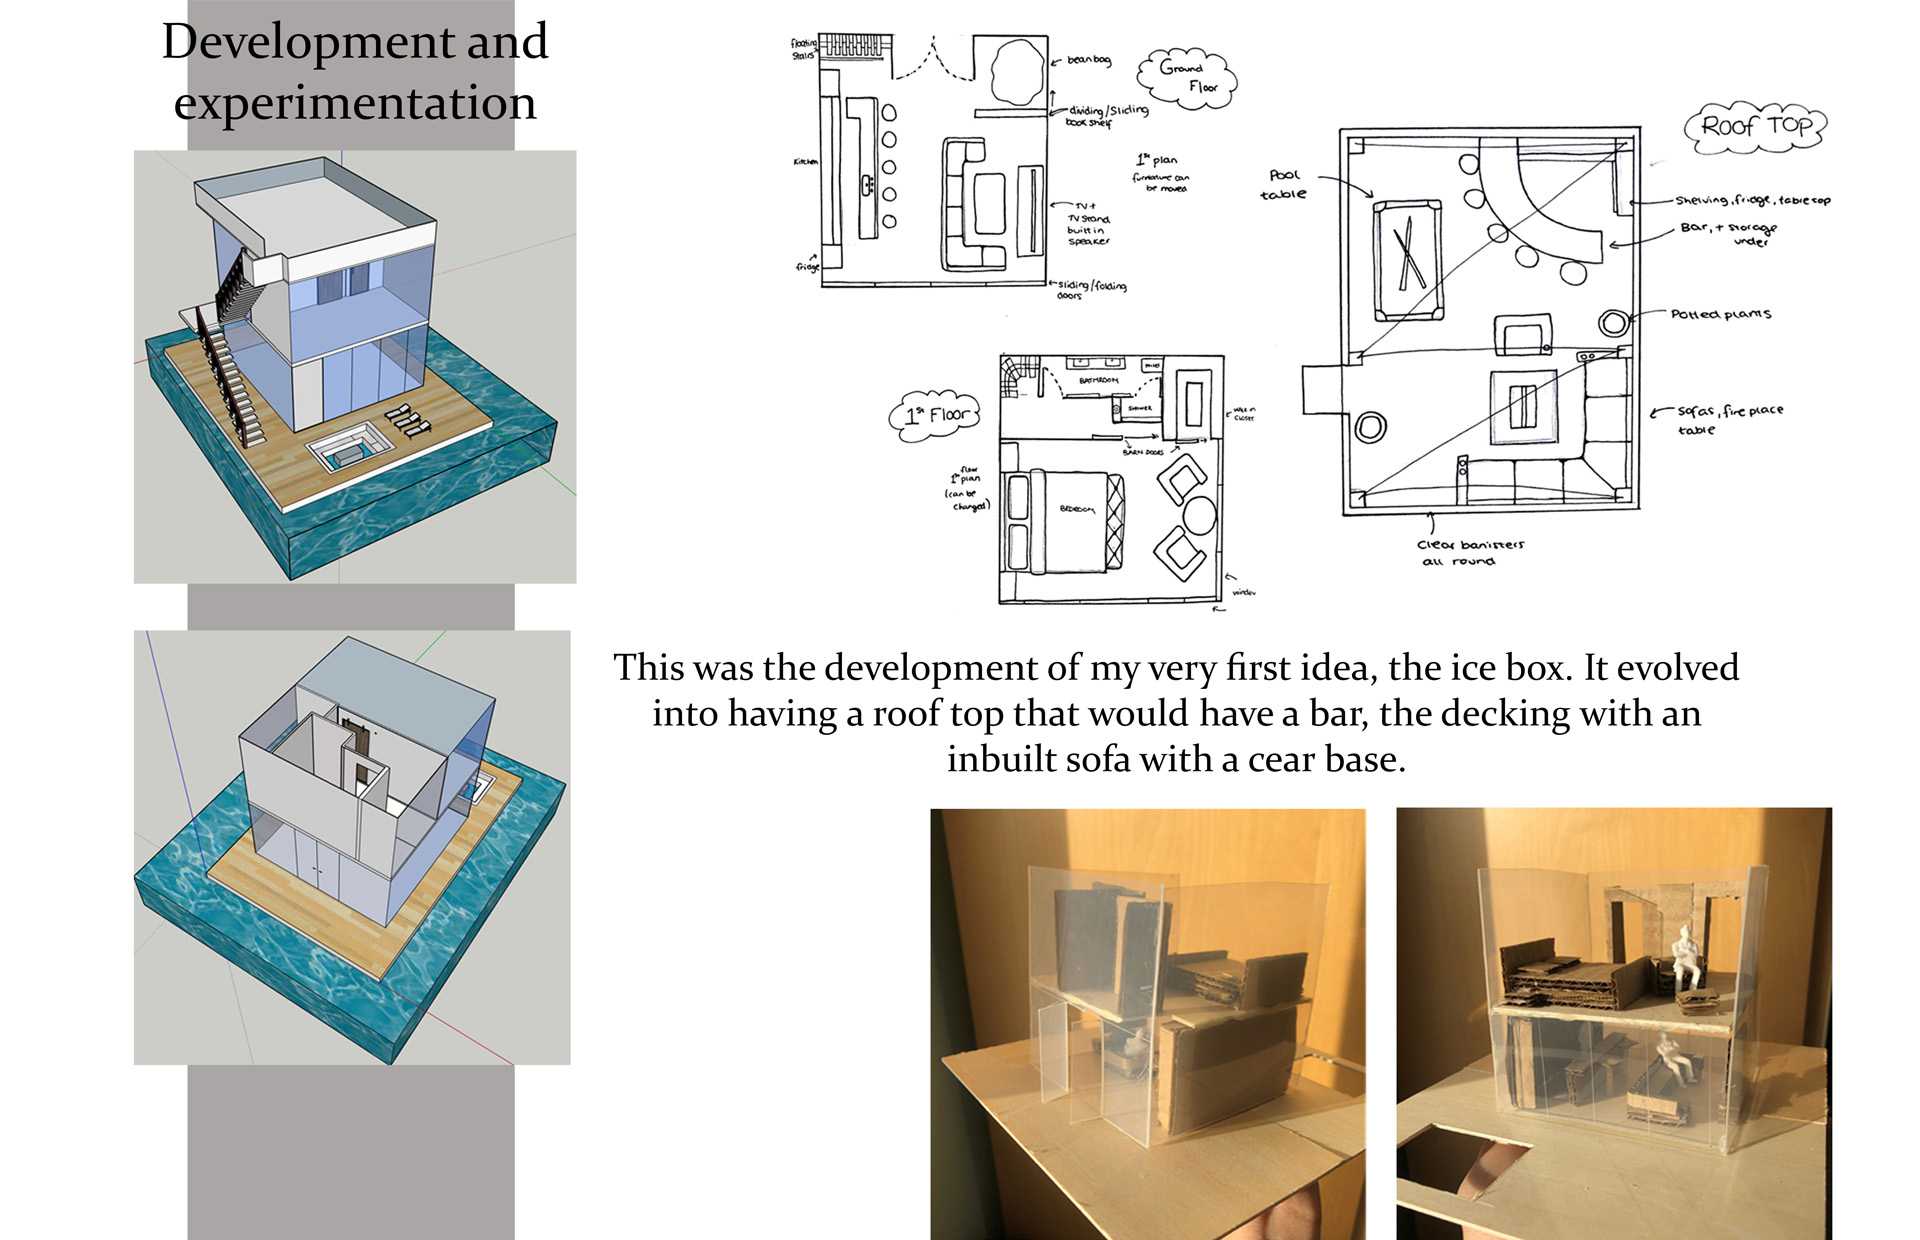 This was one of my prototypes for the Beyond the fundamentals project. A modern glass houseboat that included a bar, living space and deck that would have a built in sofa with a glass base to see the water.